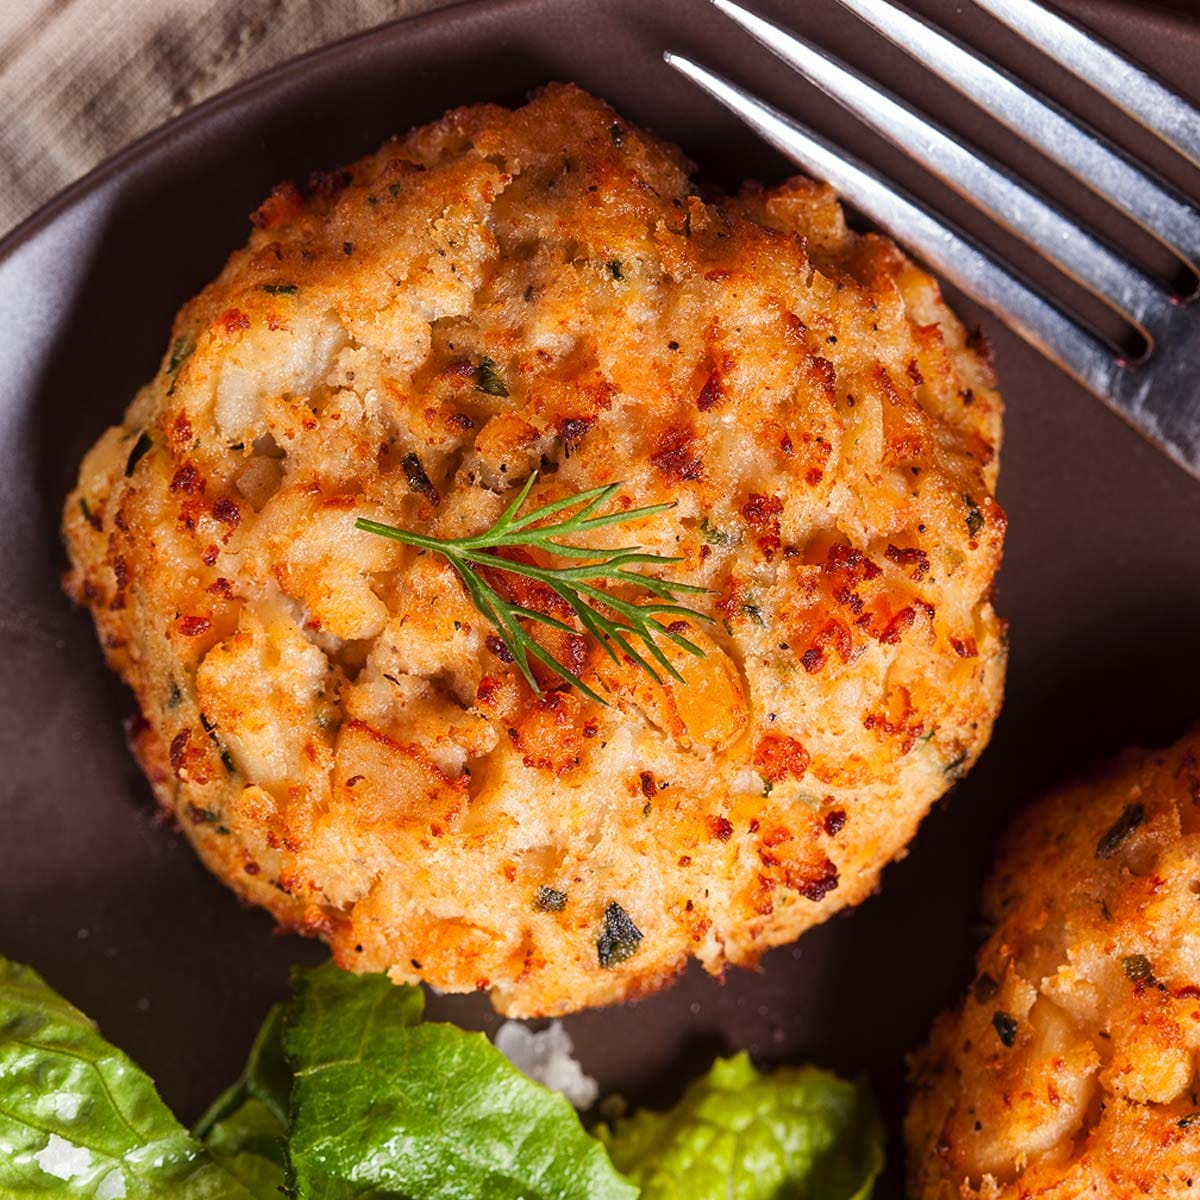 When you freeze crab cakes, the freezing process prevents bacterial growth and keeps the produce fresh for many months after you prepare them.